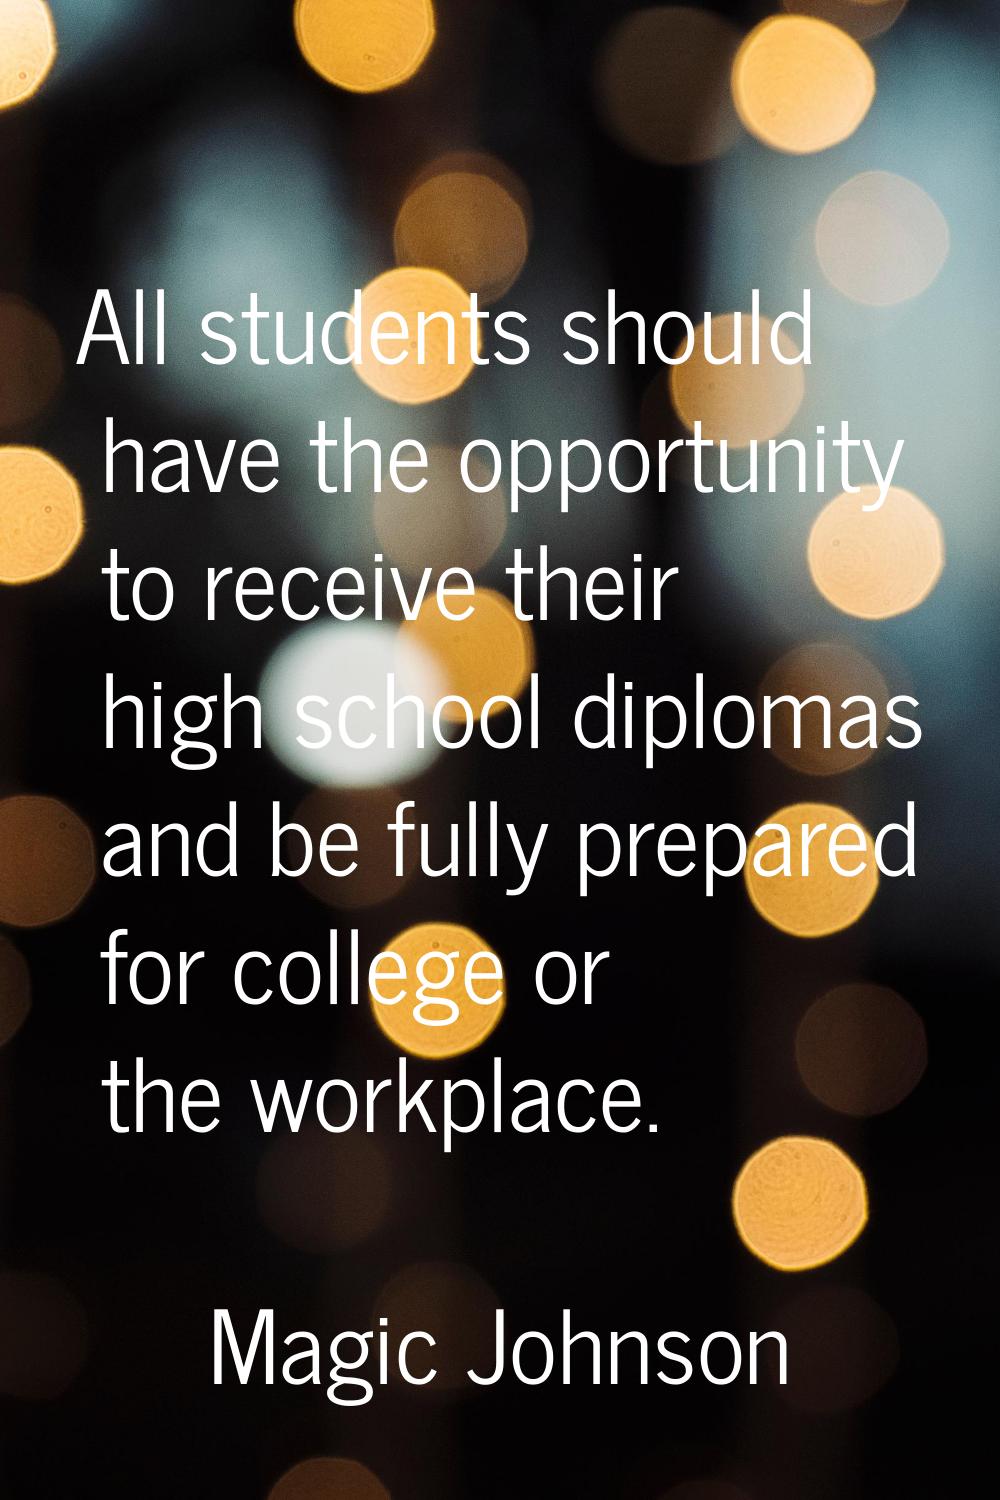 All students should have the opportunity to receive their high school diplomas and be fully prepare